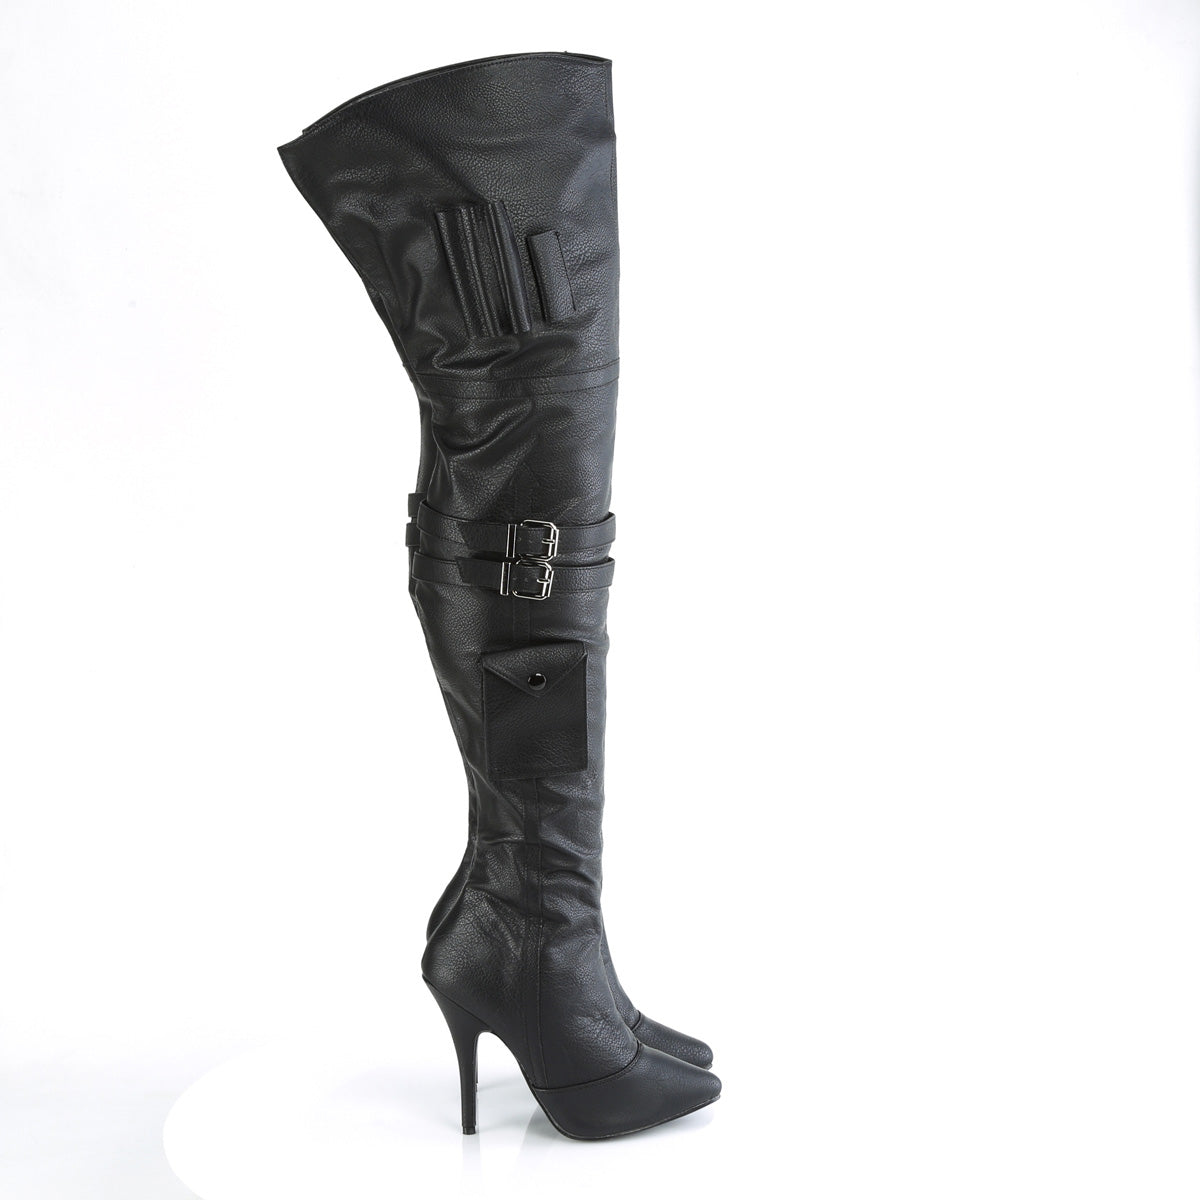 SEDUCE-3019 Pleaser Black Faux Leather Single Sole Shoes (Sexy Thigh High Boots)